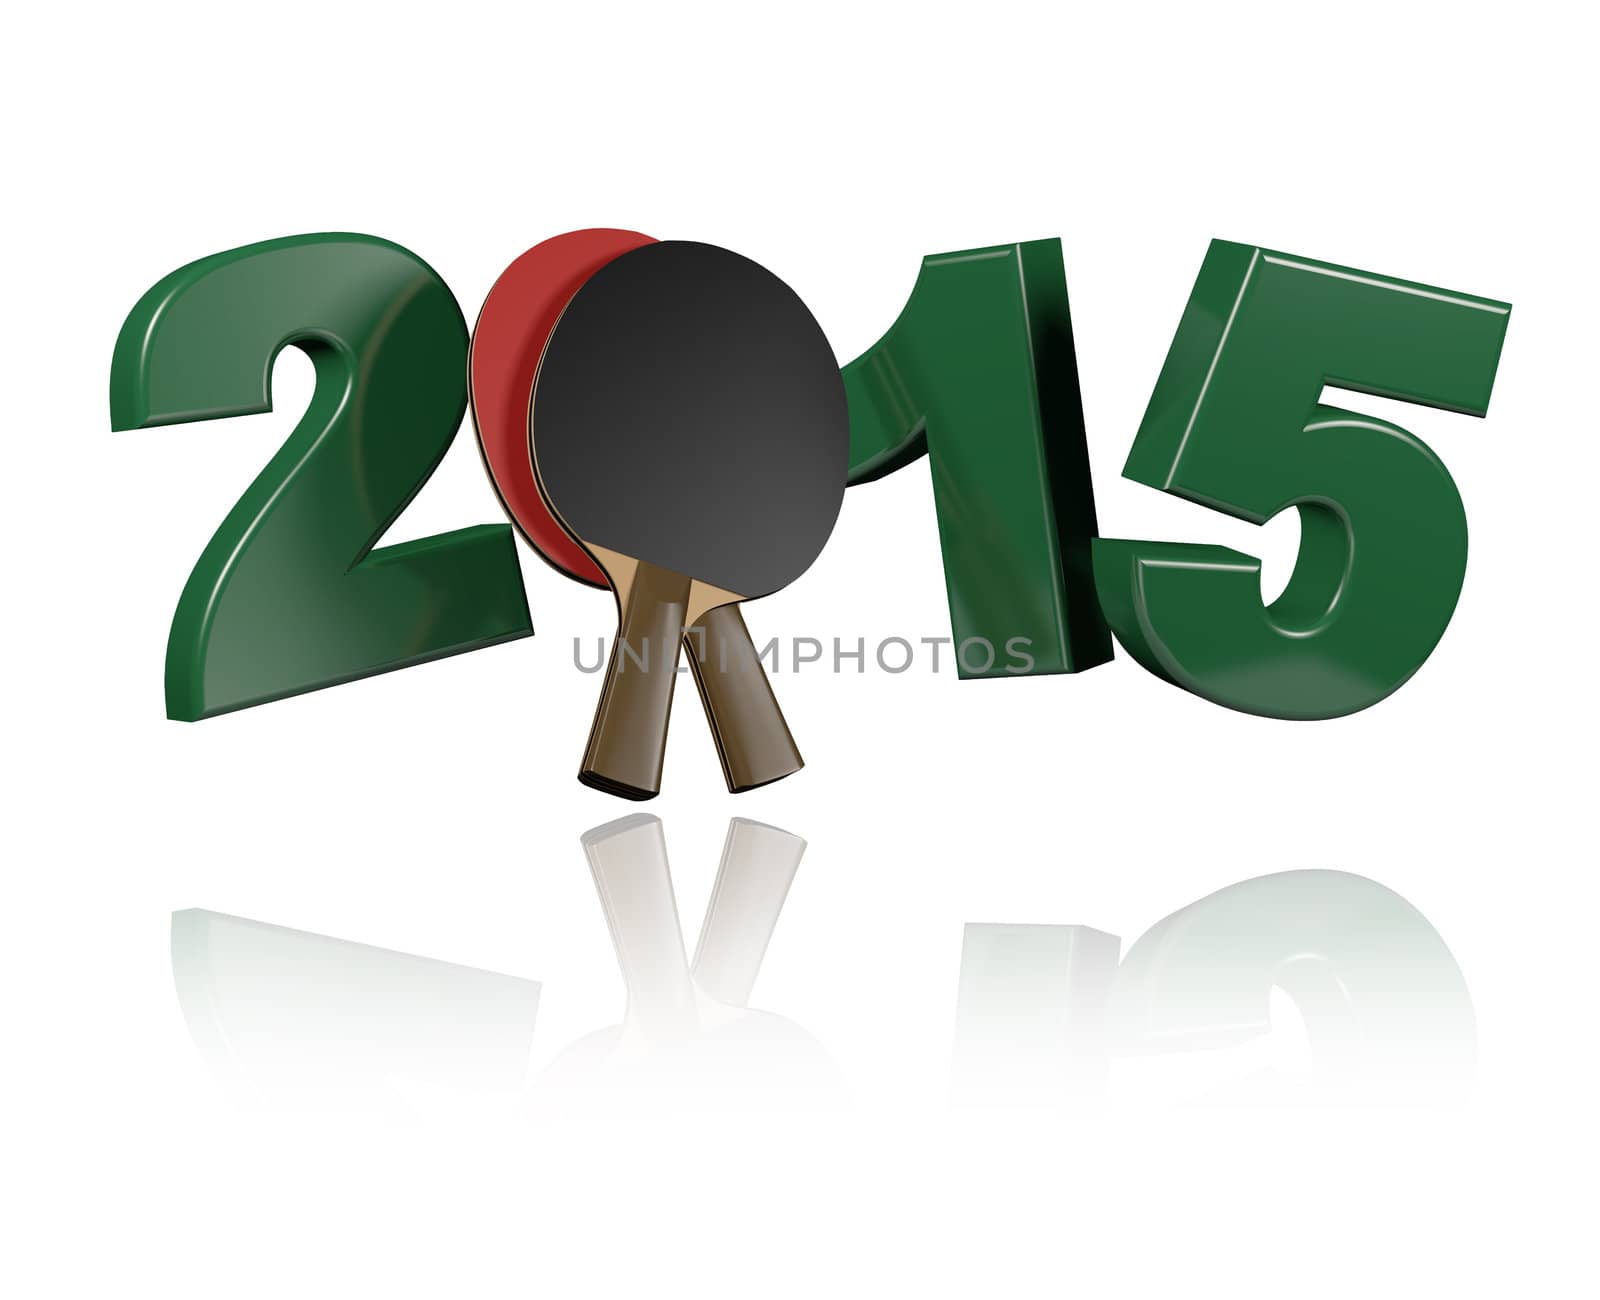 Table Tennis 2015 with a White Background